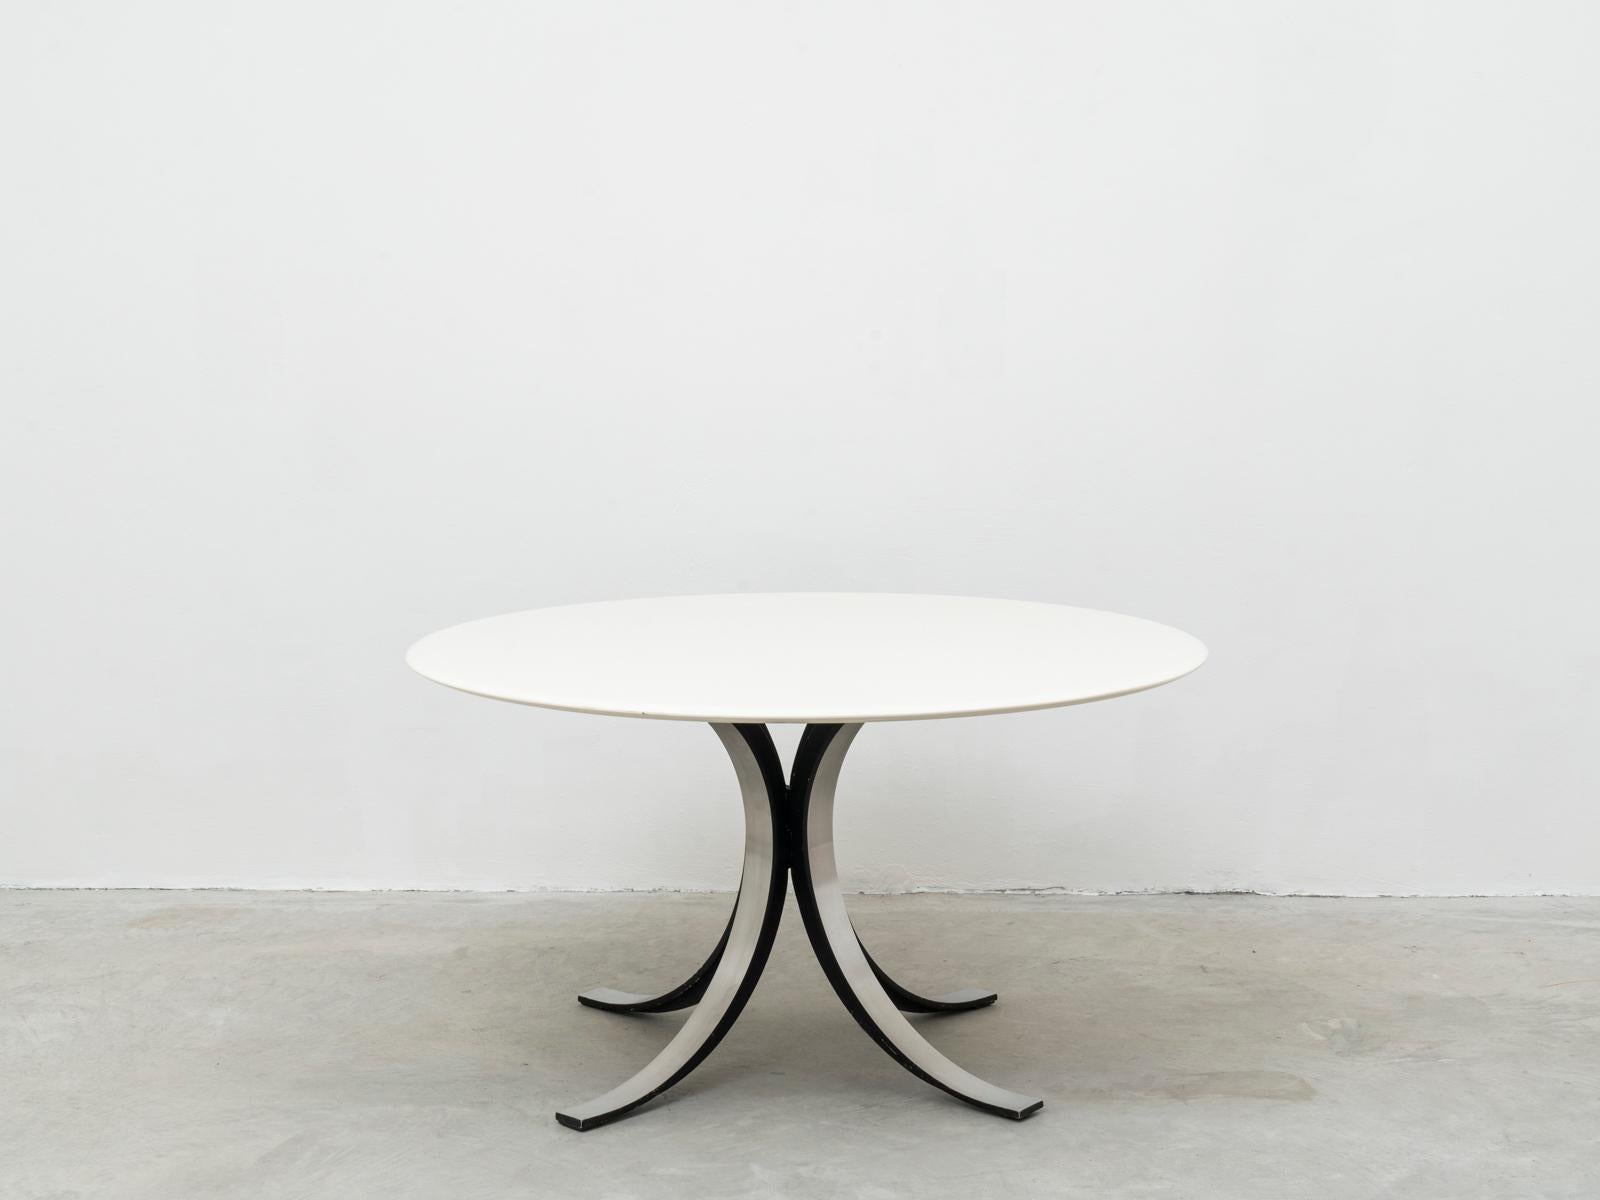 This iconic round table was designed by Italian design master Osvaldo Borsani together with his peer Eugenio Gerli in 1963 for Tecno, the manufacturer founded by Borsani himself. 
This table is made of a white lacquered wood top and a demountable